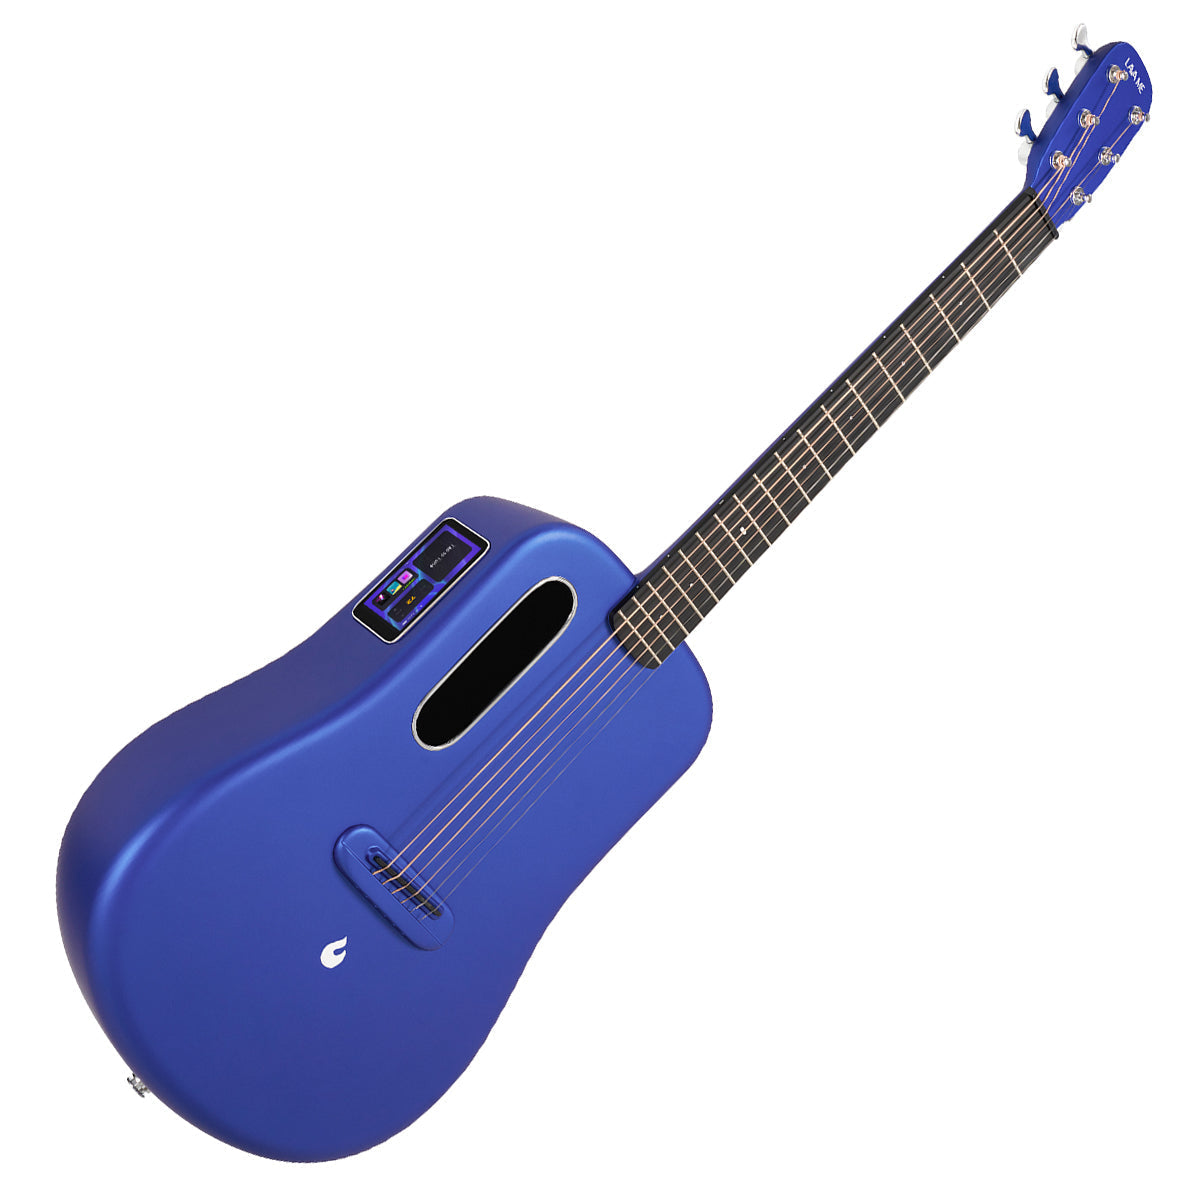 LAVA ME 3 36" with Space Bag ~ Blue, Acoustic Guitar for sale at Richards Guitars.